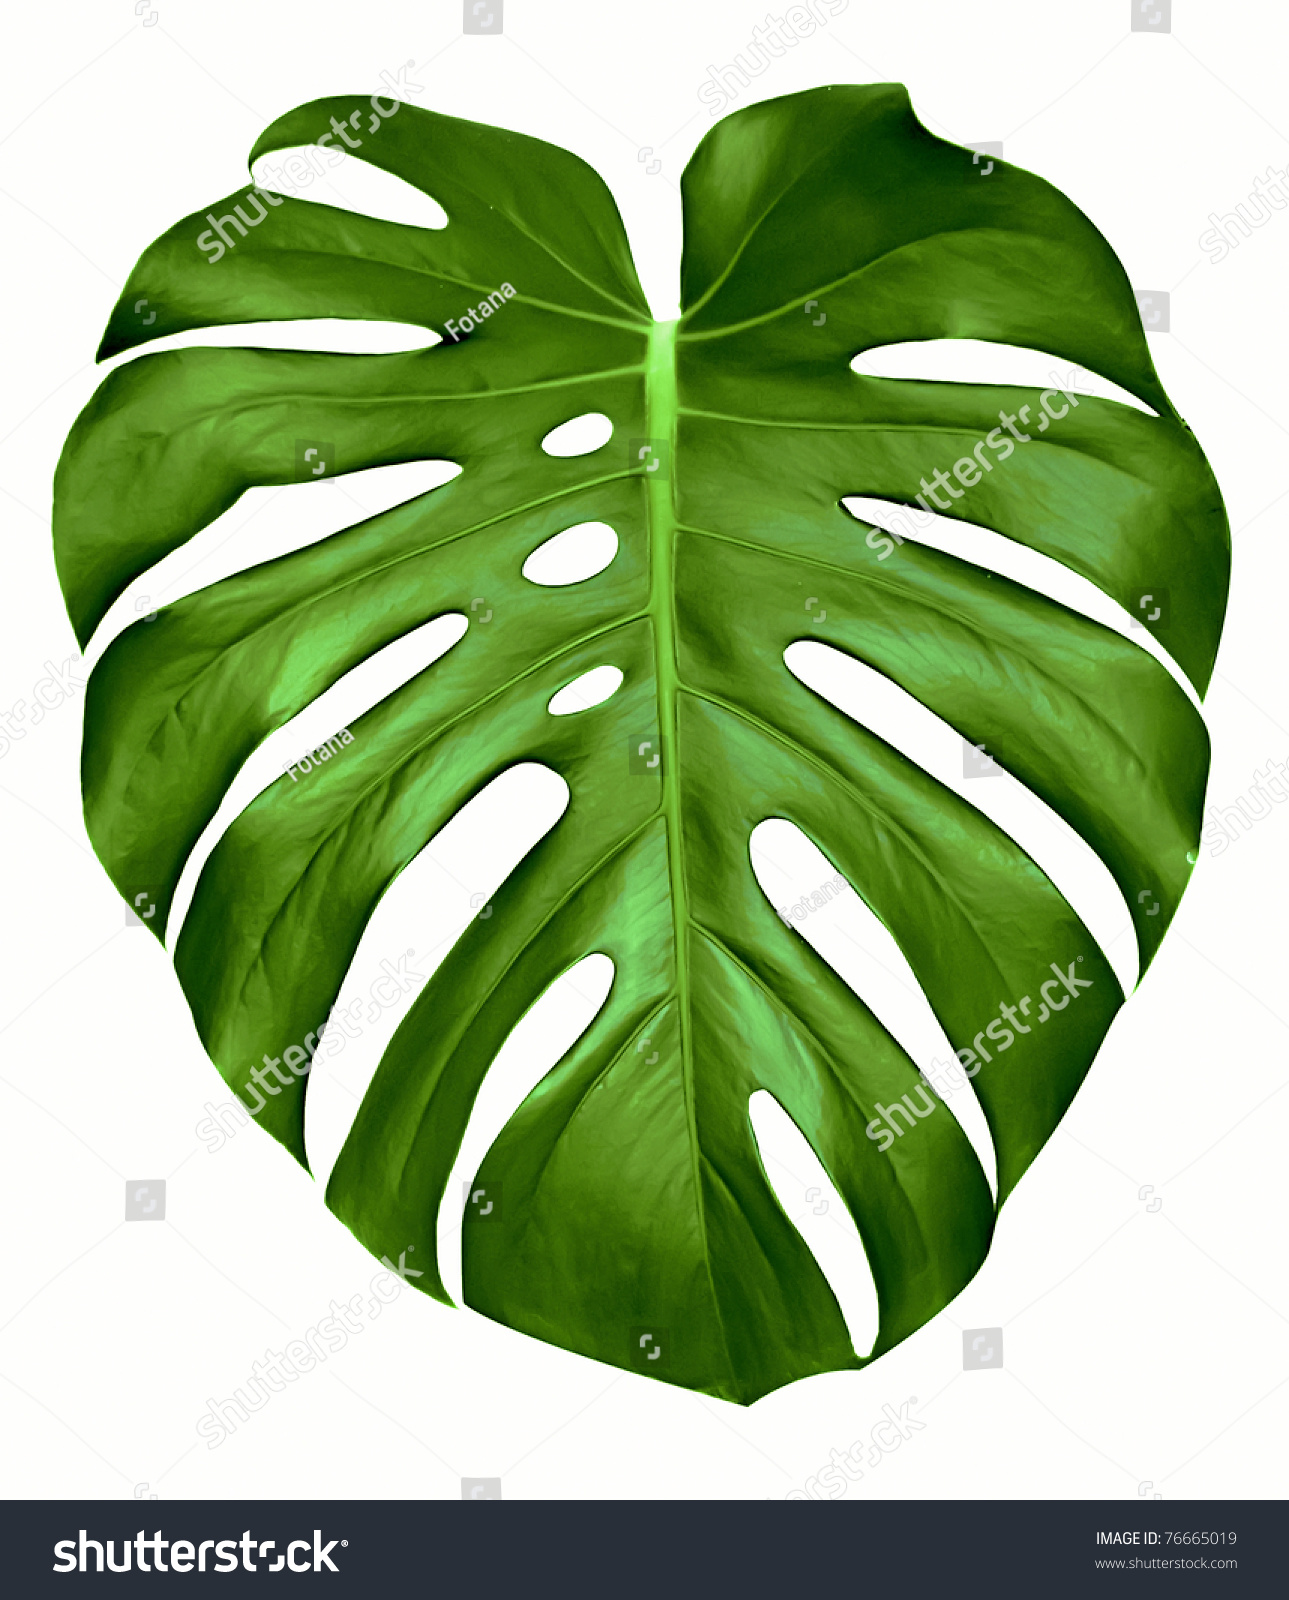 Big Green Leaf Monstera Plant Isolated Stock Photo (Download Now ...